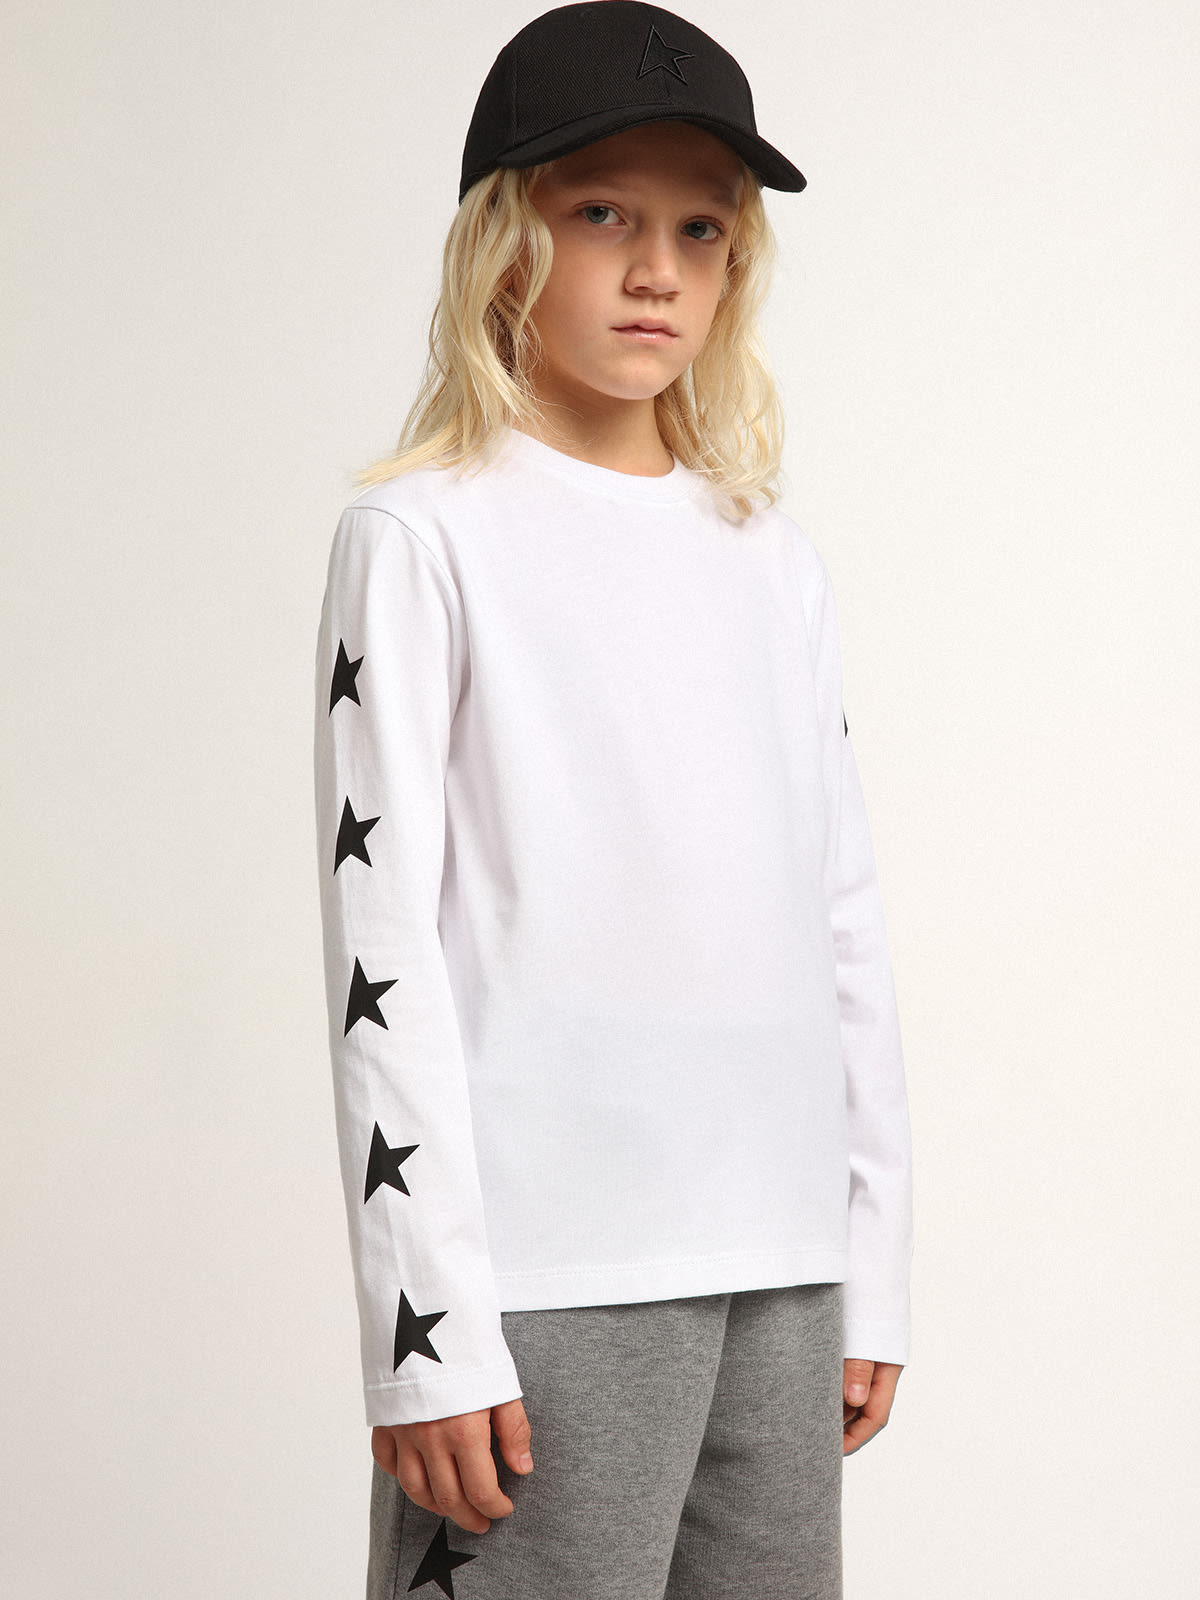 Golden Goose - T-shirt bianca a maniche lunghe con stelle nere a contrasto in 